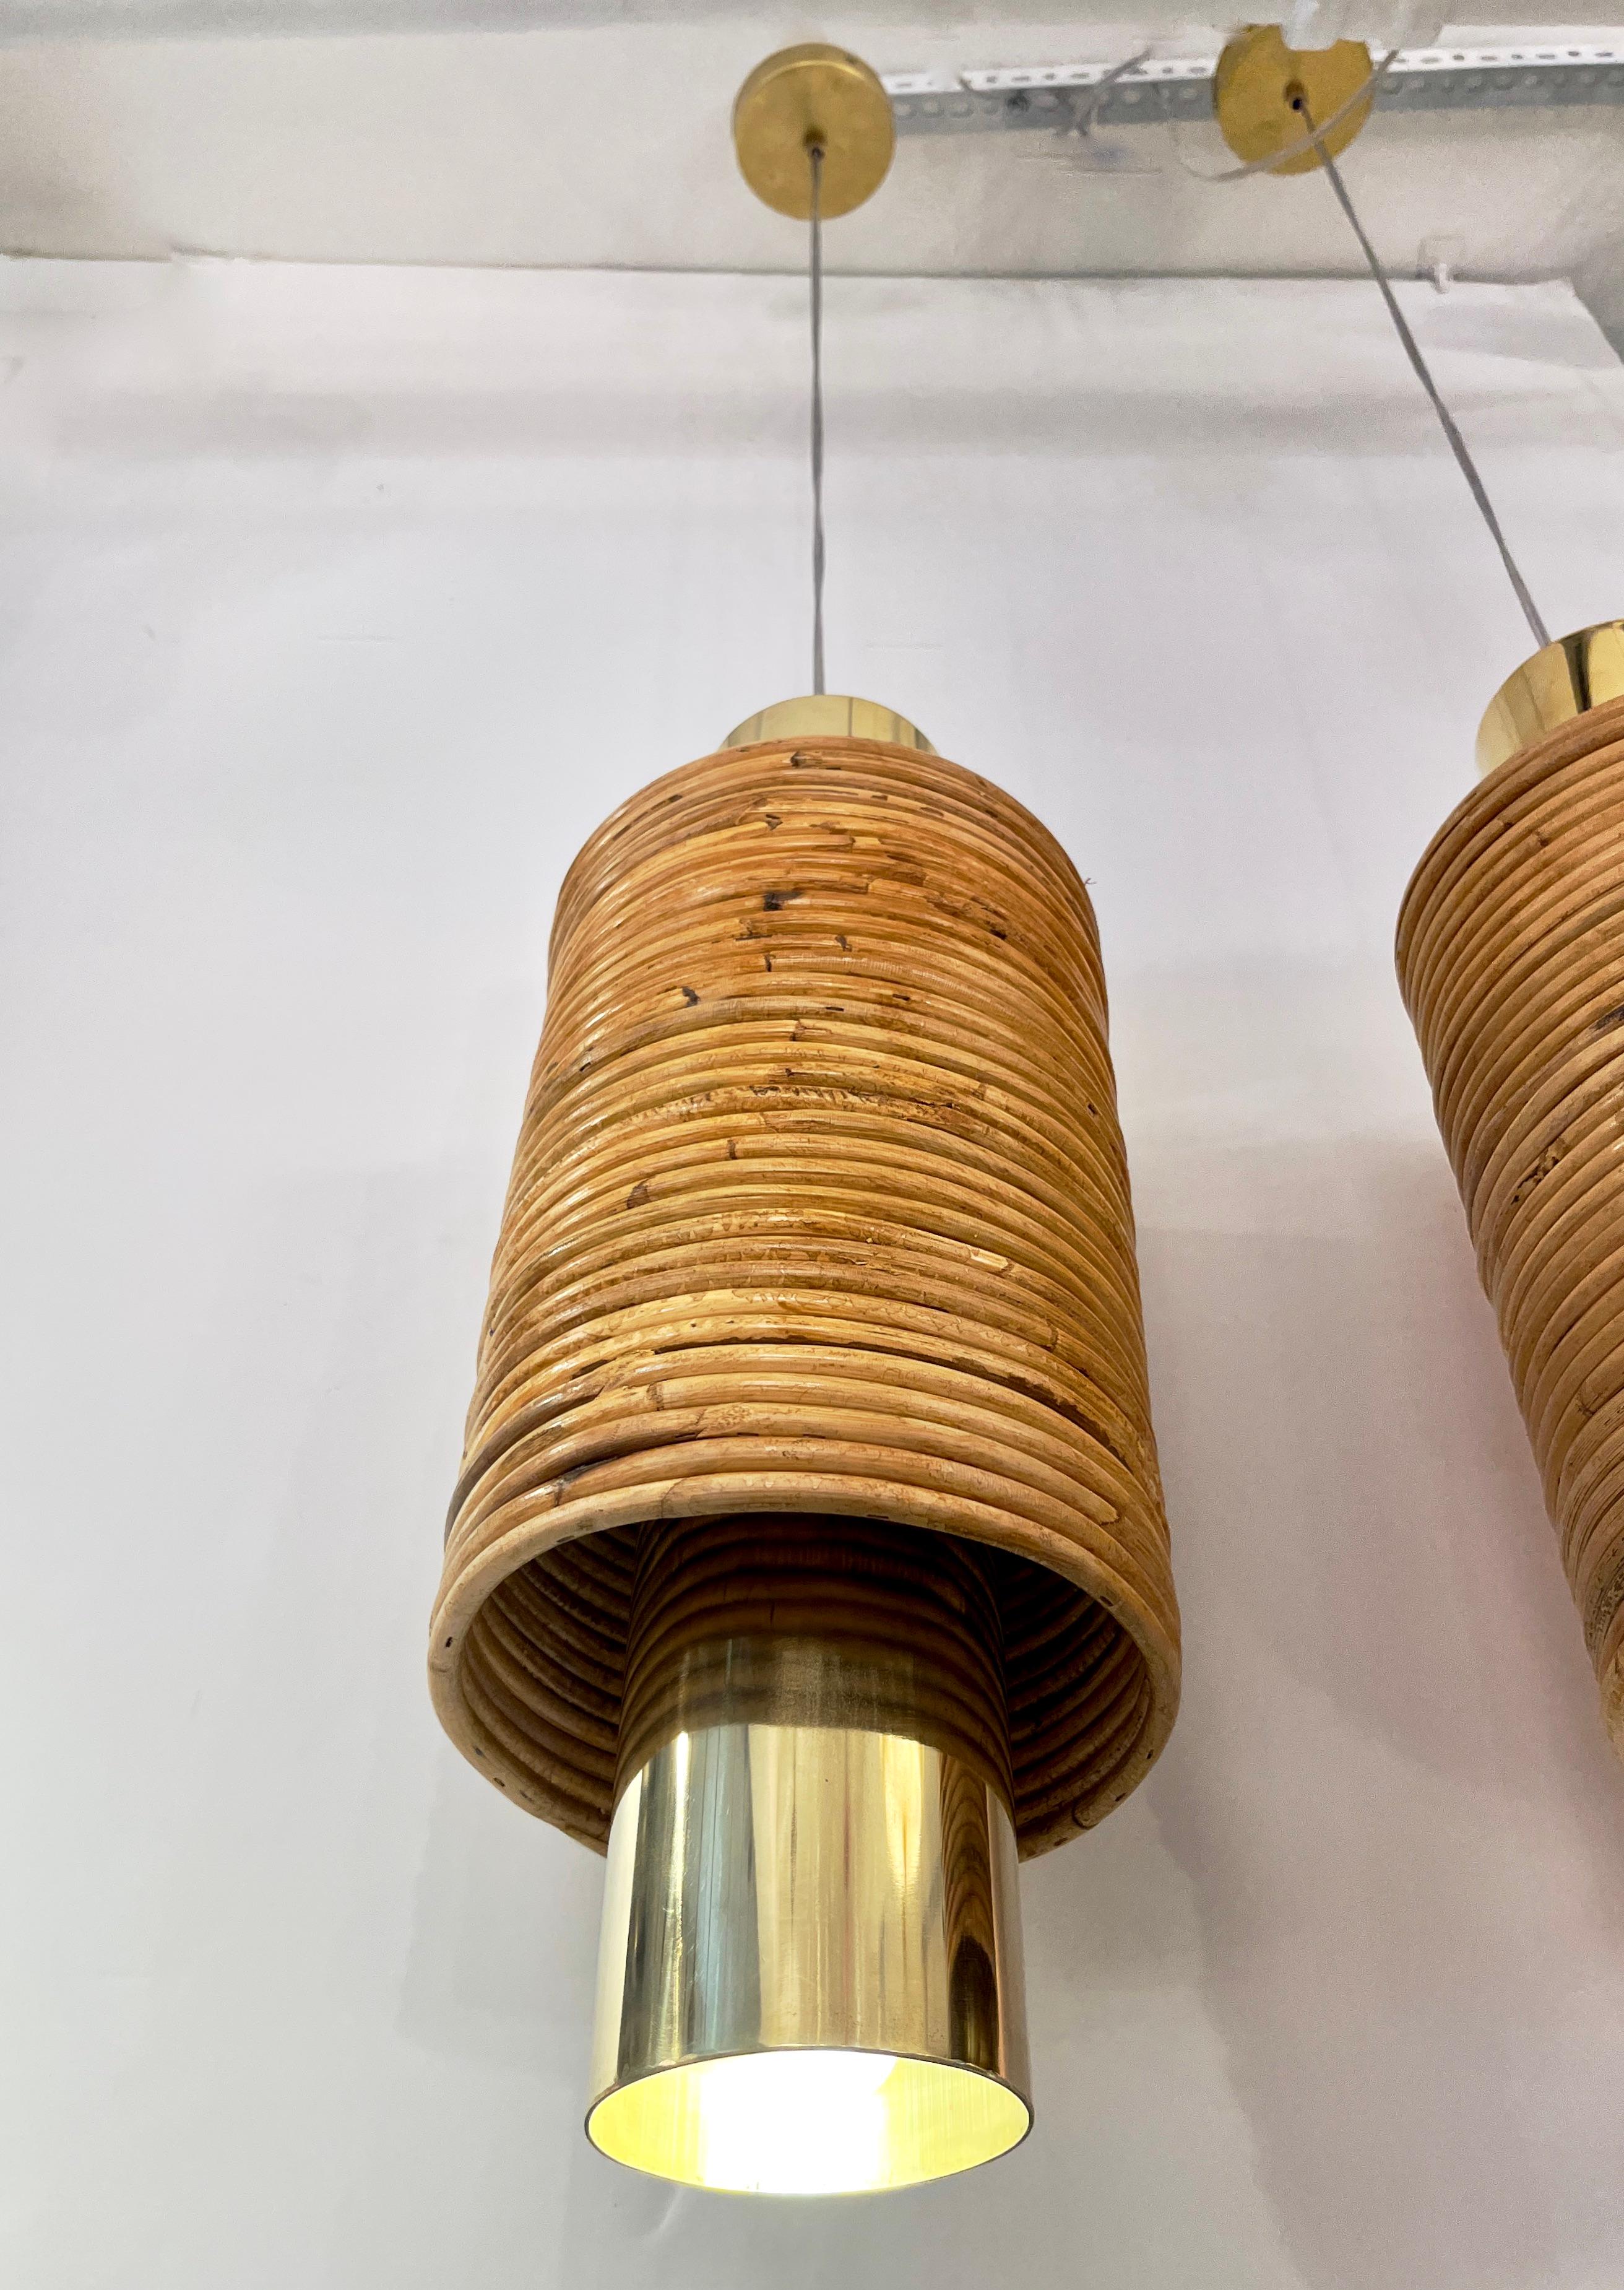 A modern organic light source that brings an earthy vibe to any space with a warm modern minimalist design. This pendant, ideal in a group or as a spot over a bedside table or kitchen island and in a patio area, is entirely hand-crafted in Italy and